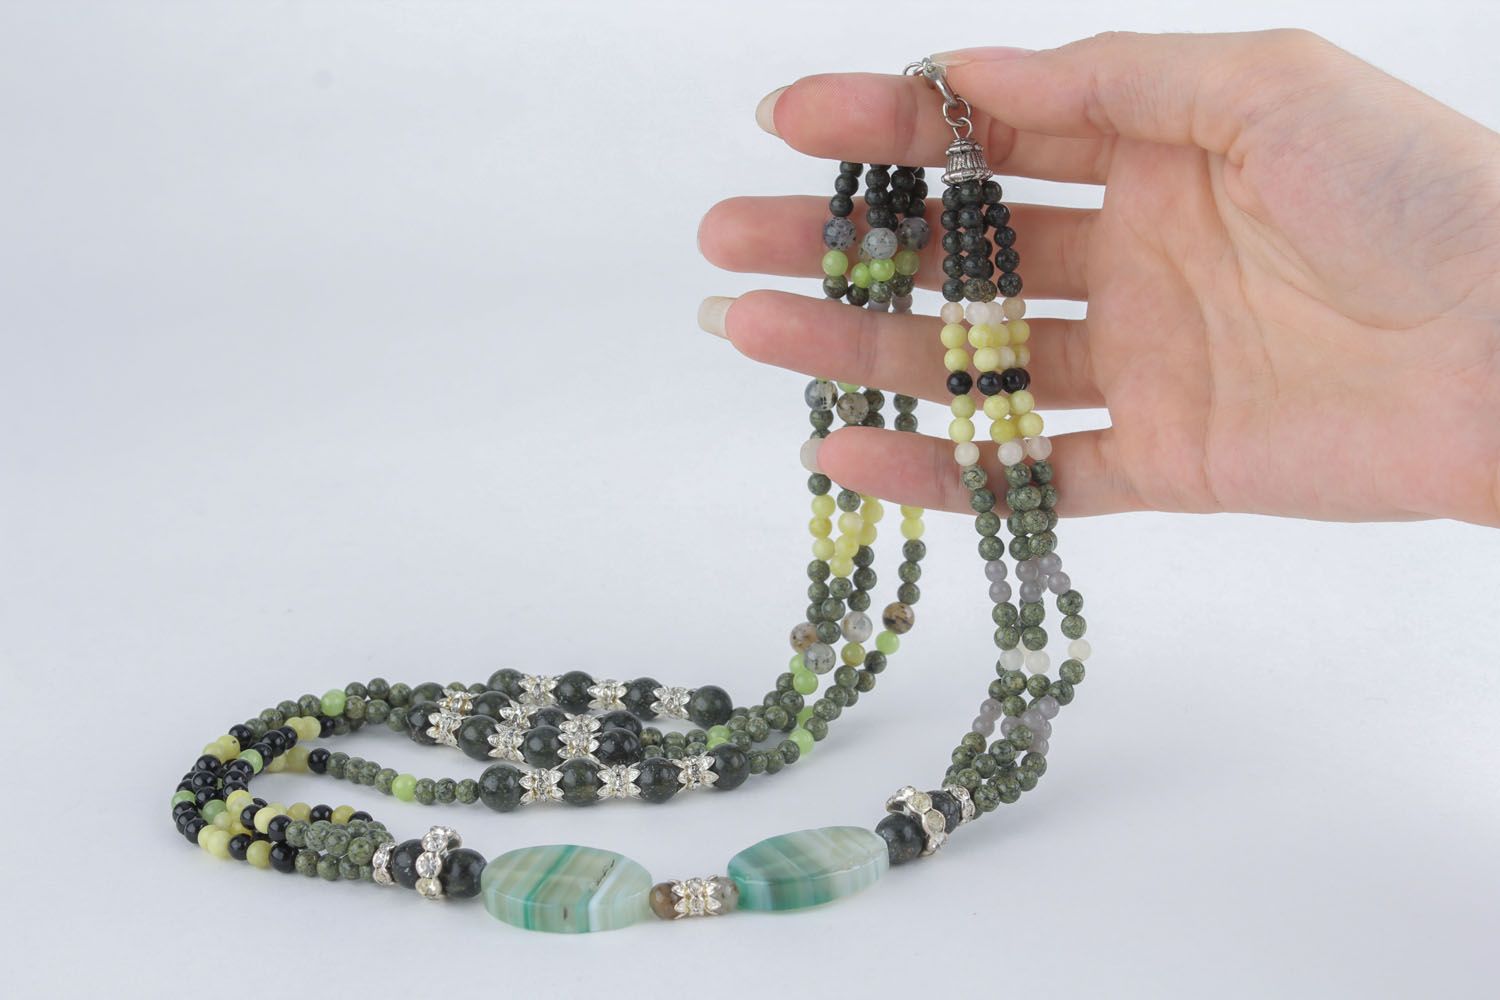 Women's necklace with natural stones photo 5